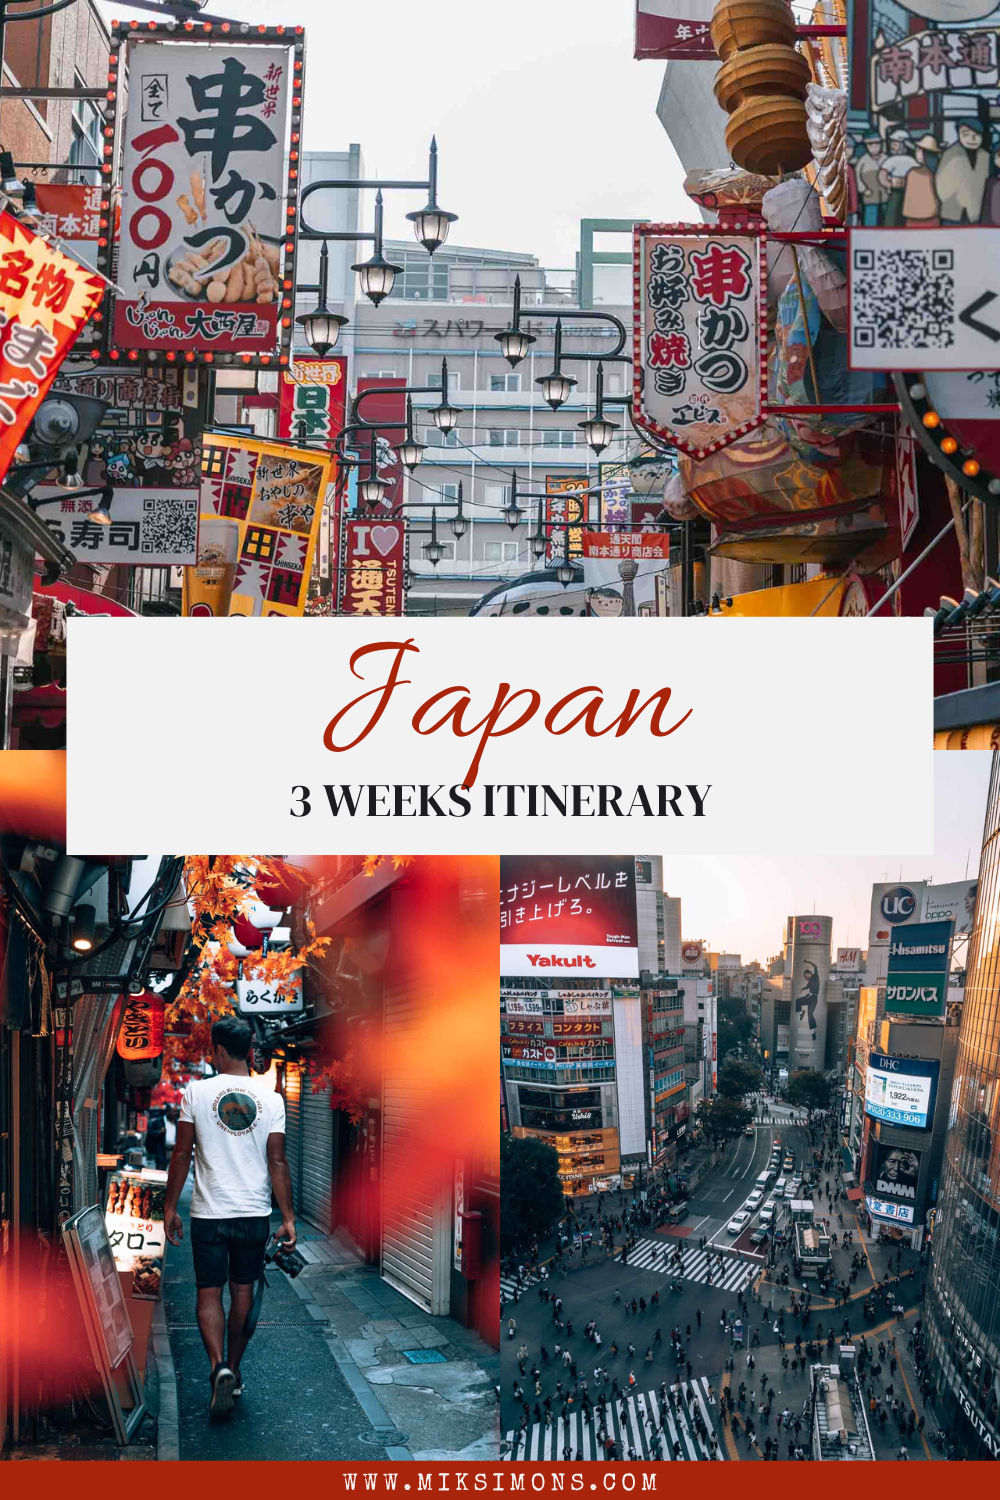 Japan in 3 weeks itinerary2